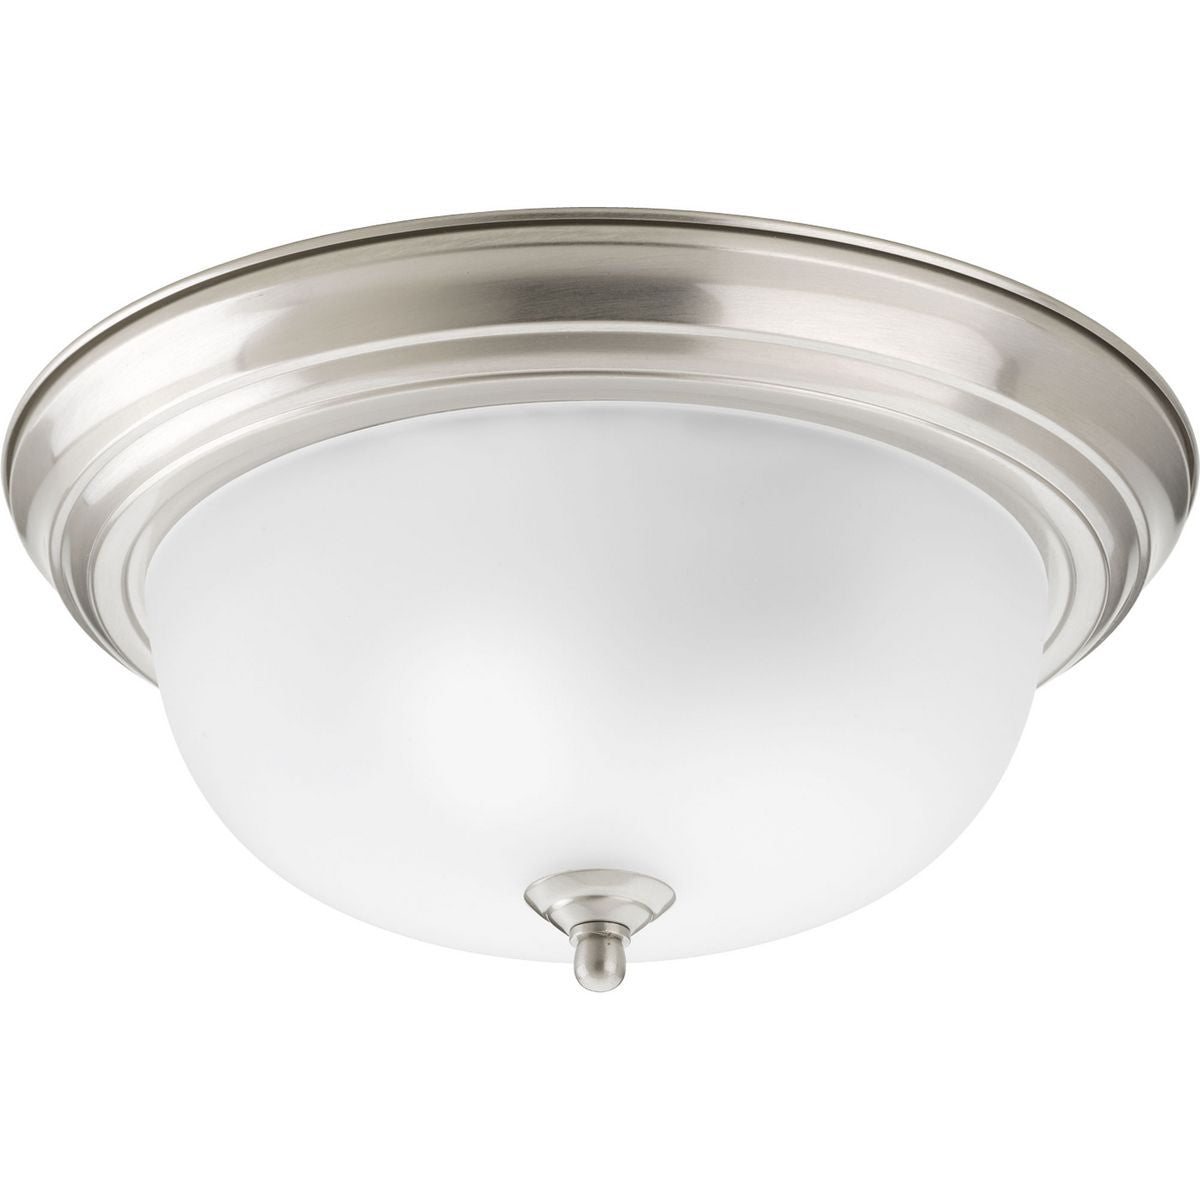 PROGRESS LIGHTING P3925-09ET Brushed Nickel Two-Light Dome Glass 13-1/4" Close-to-Ceiling